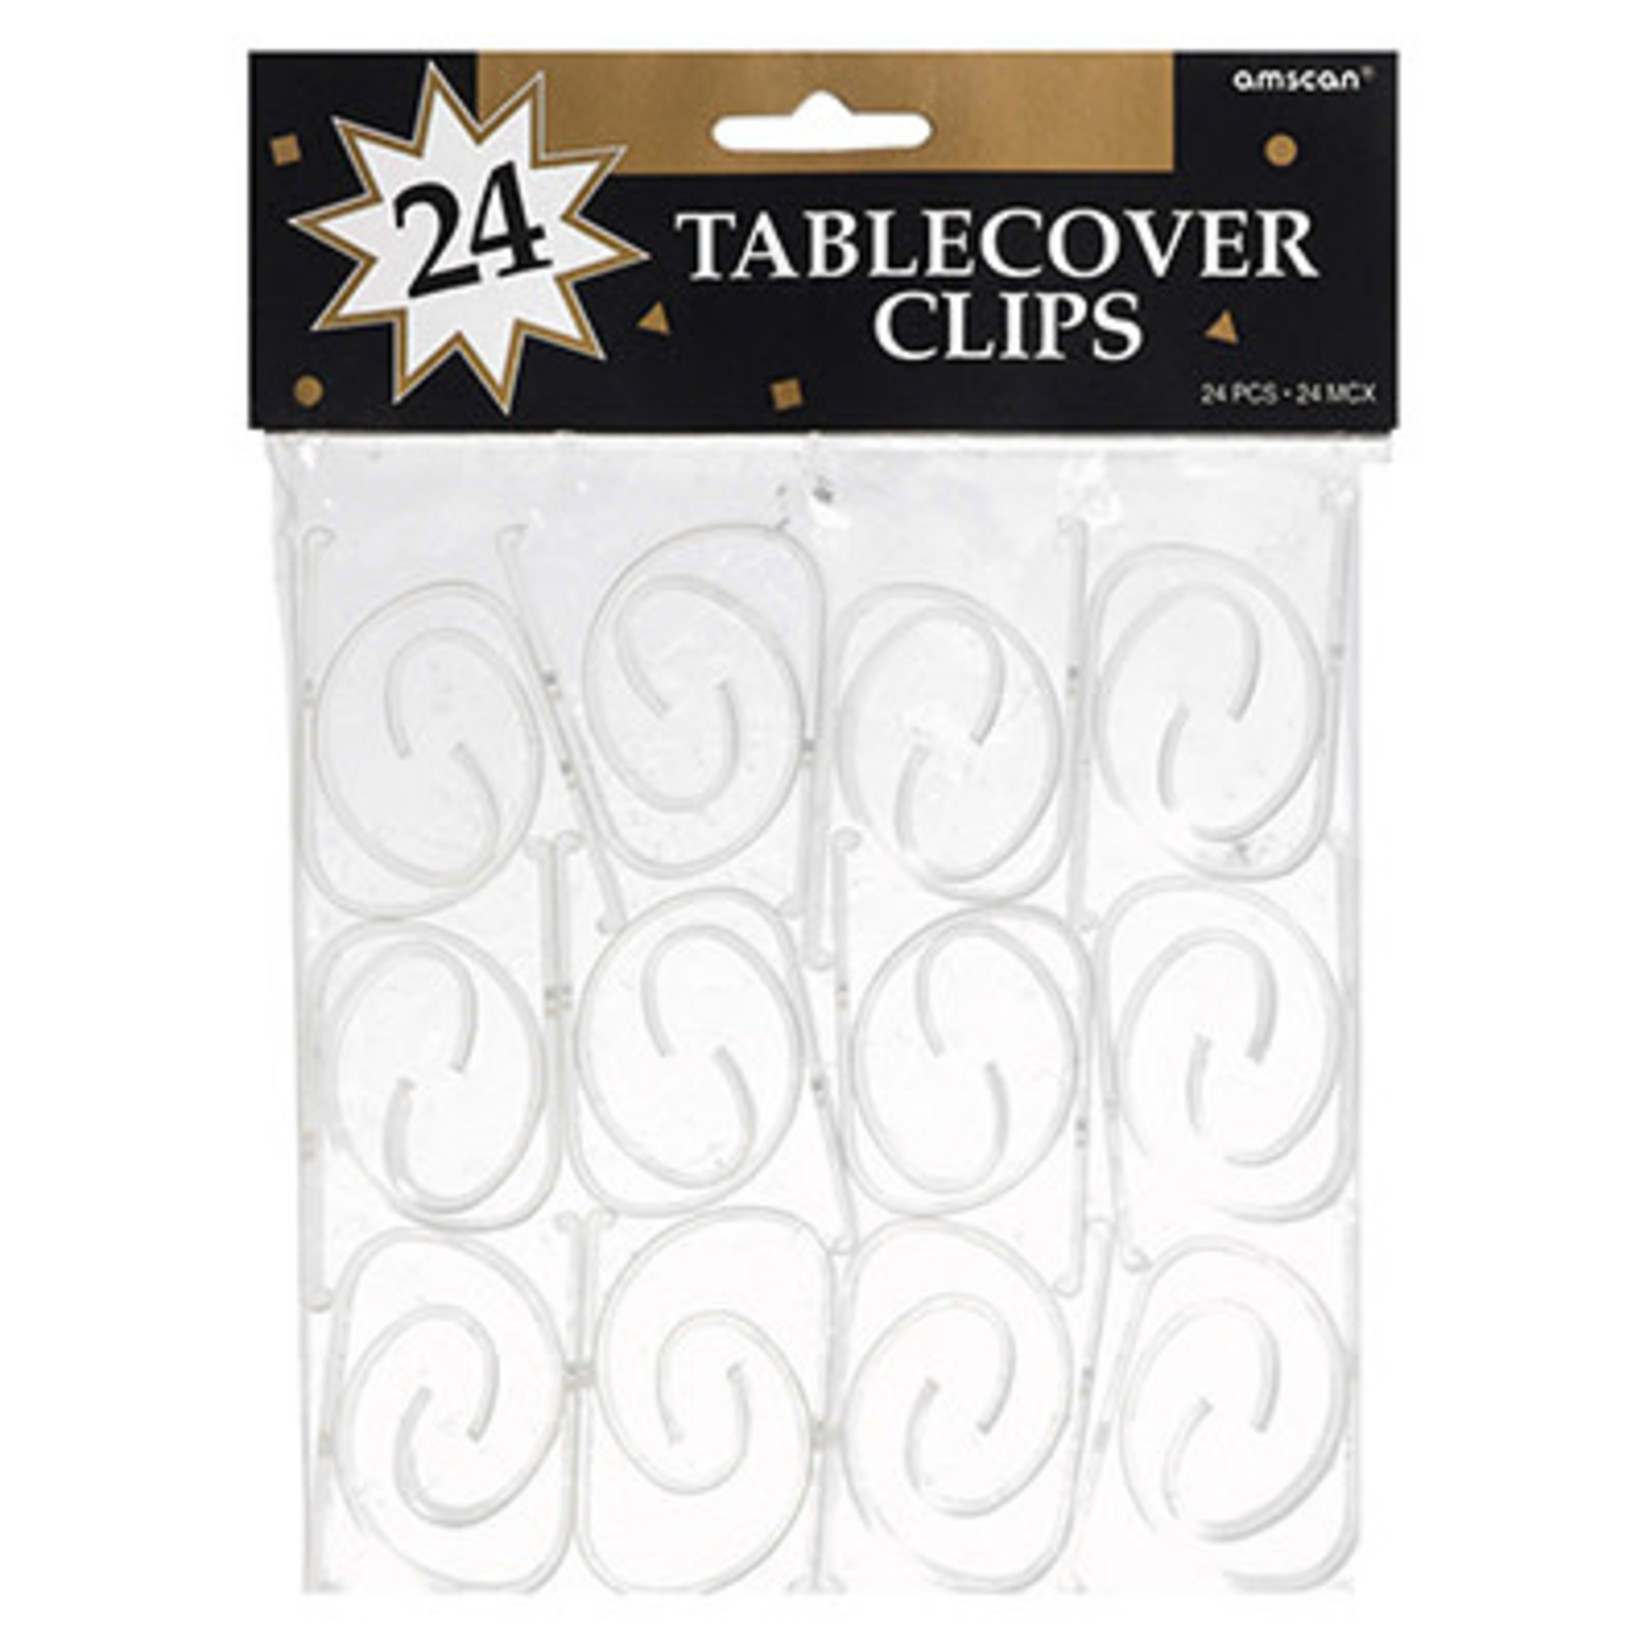 Amscan Table Cover Clips - 24ct.